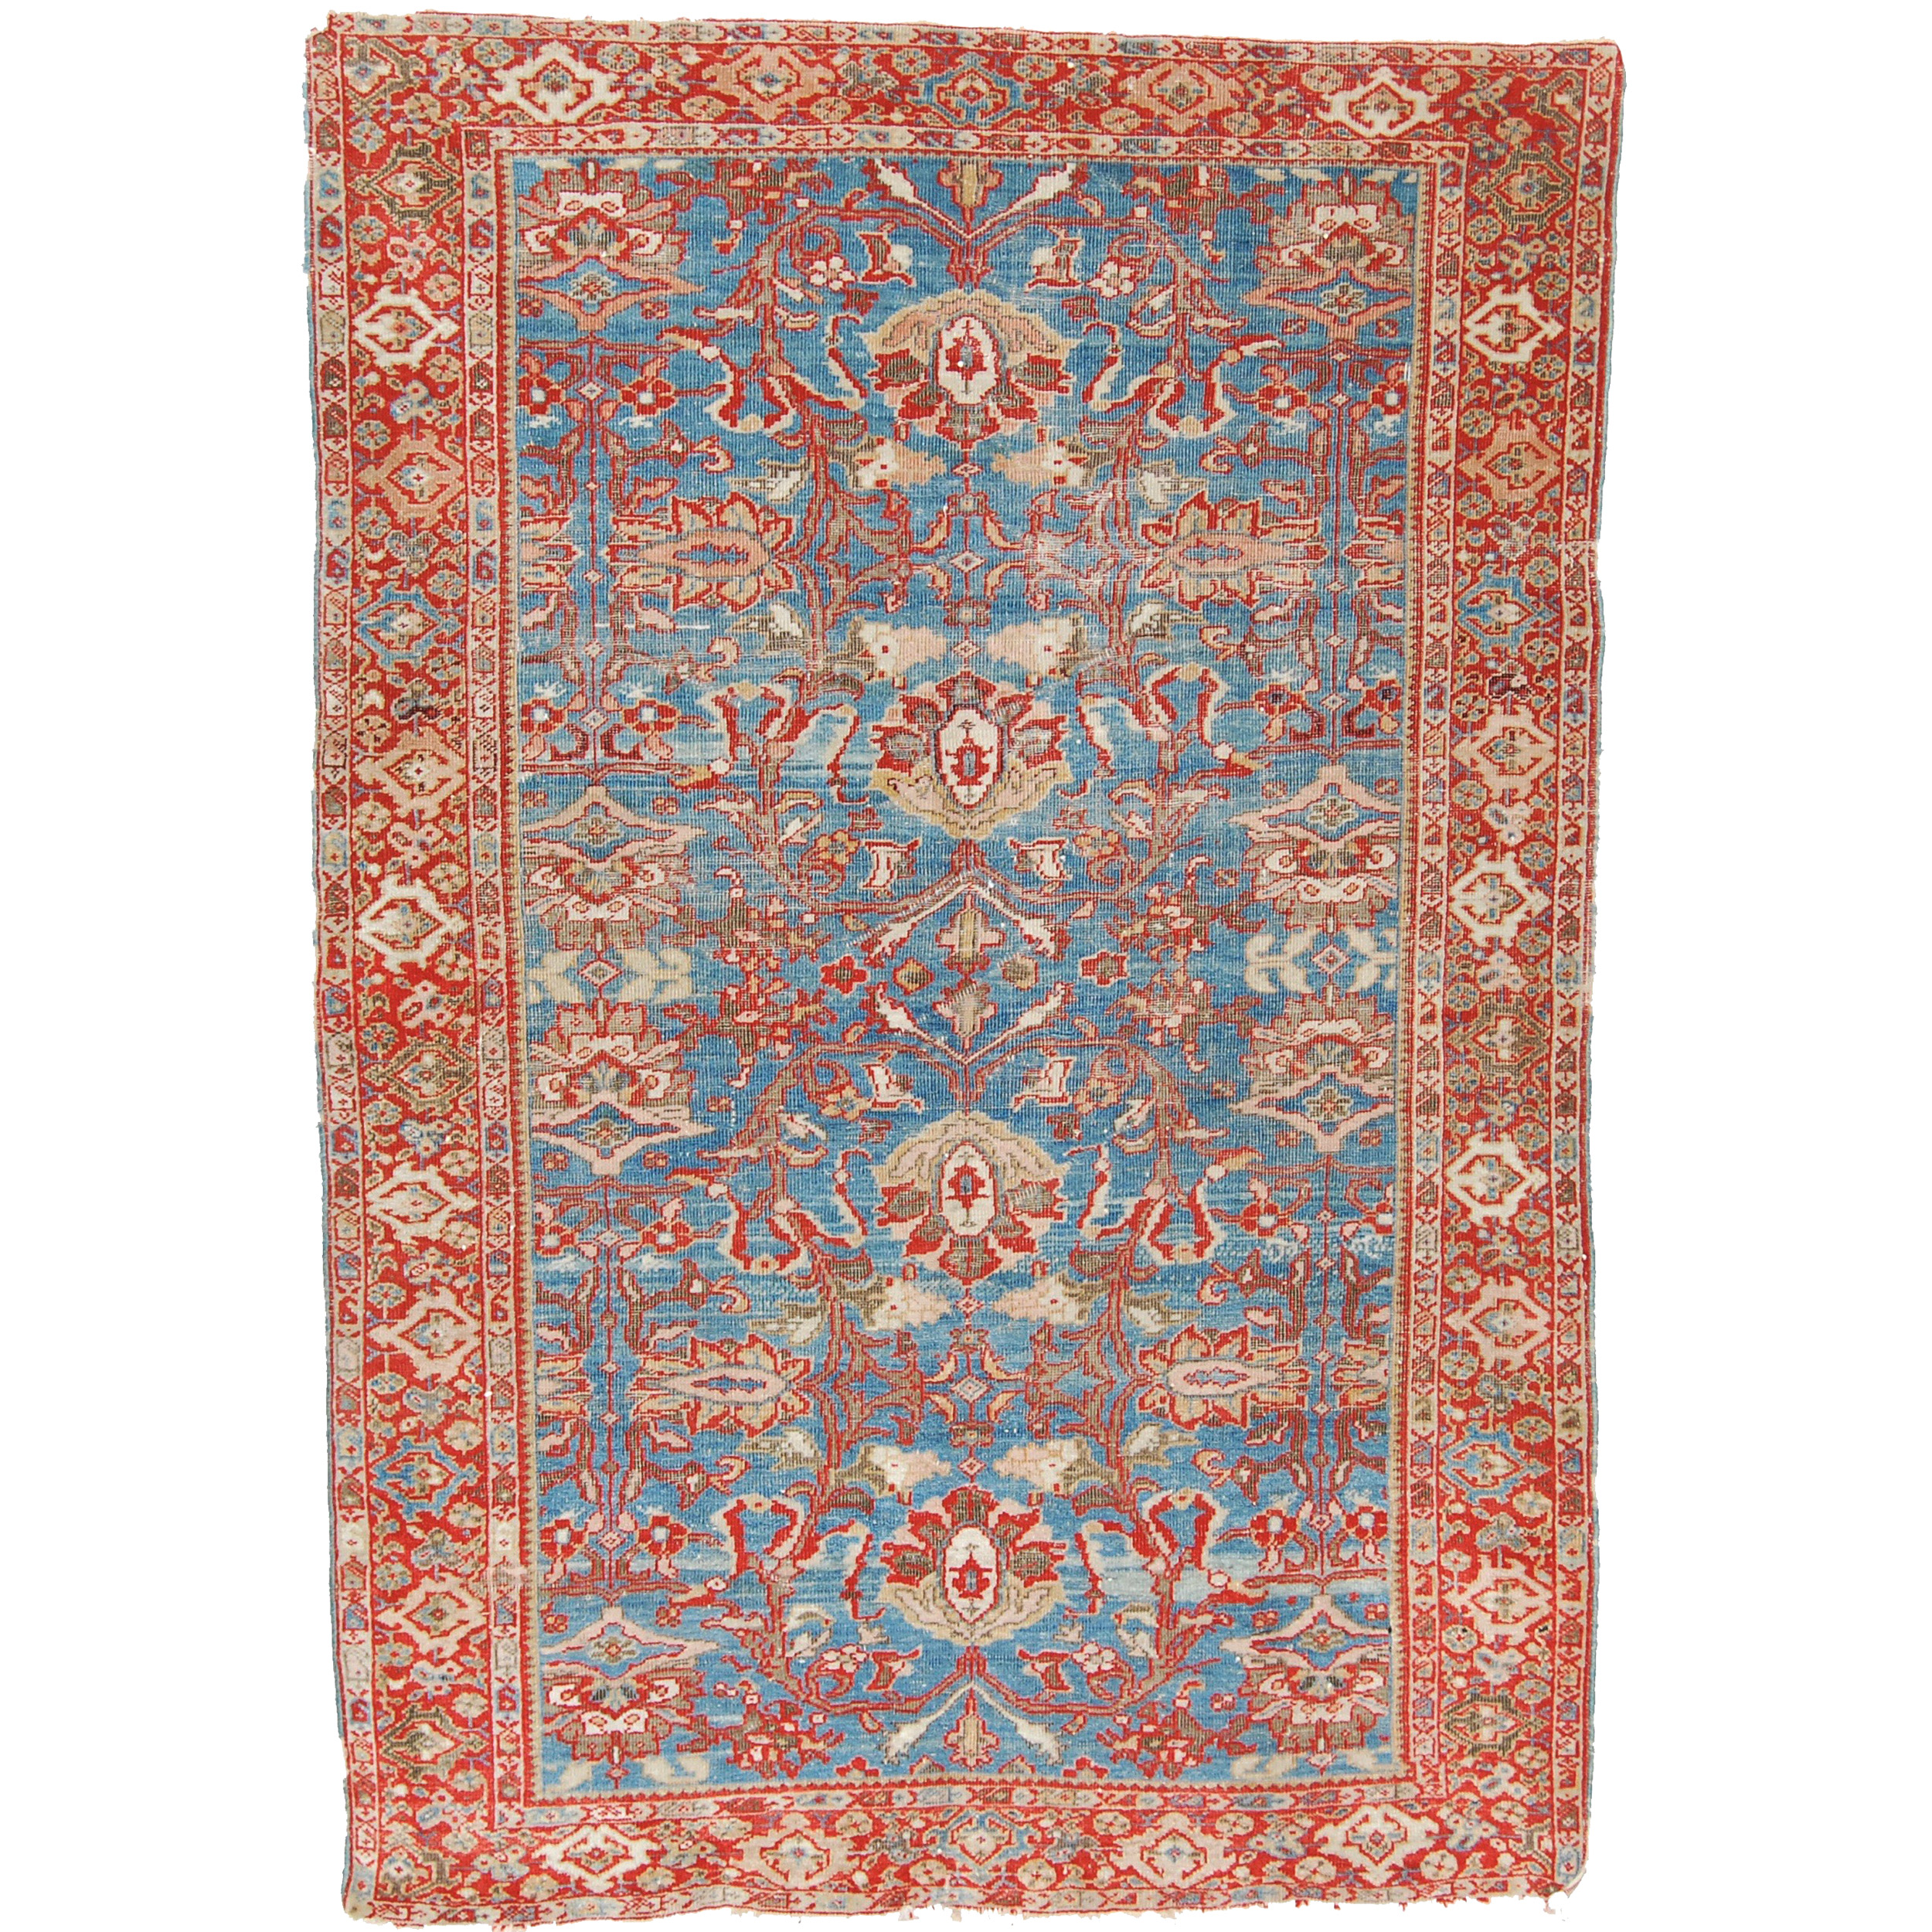 Exceptional small Persian Sultanabad rug, possibly produced by Ziegler & Co., circa 1890, Douglas Stock Gallery Archives, antique Oriental rugs Boston area, antique rugs New York, antique rugs New England